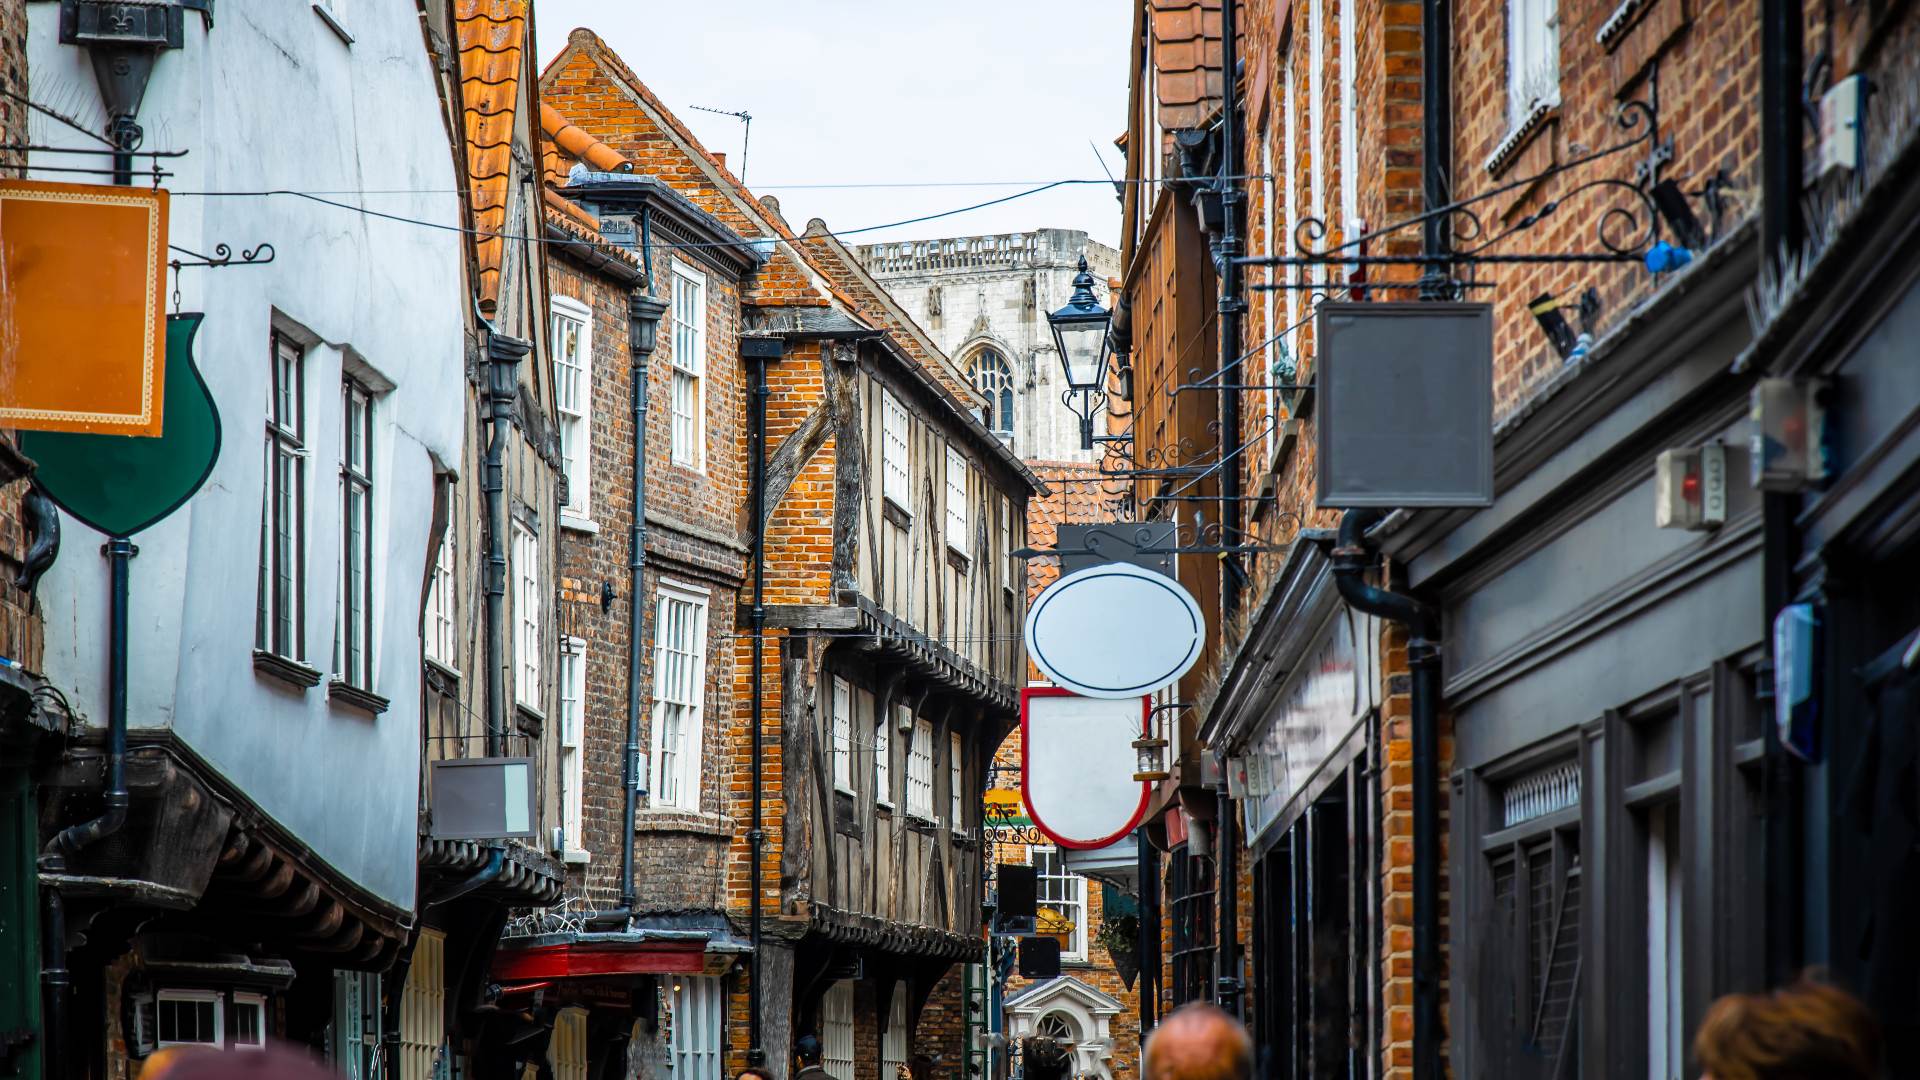 Medieval street of Shambles in York England